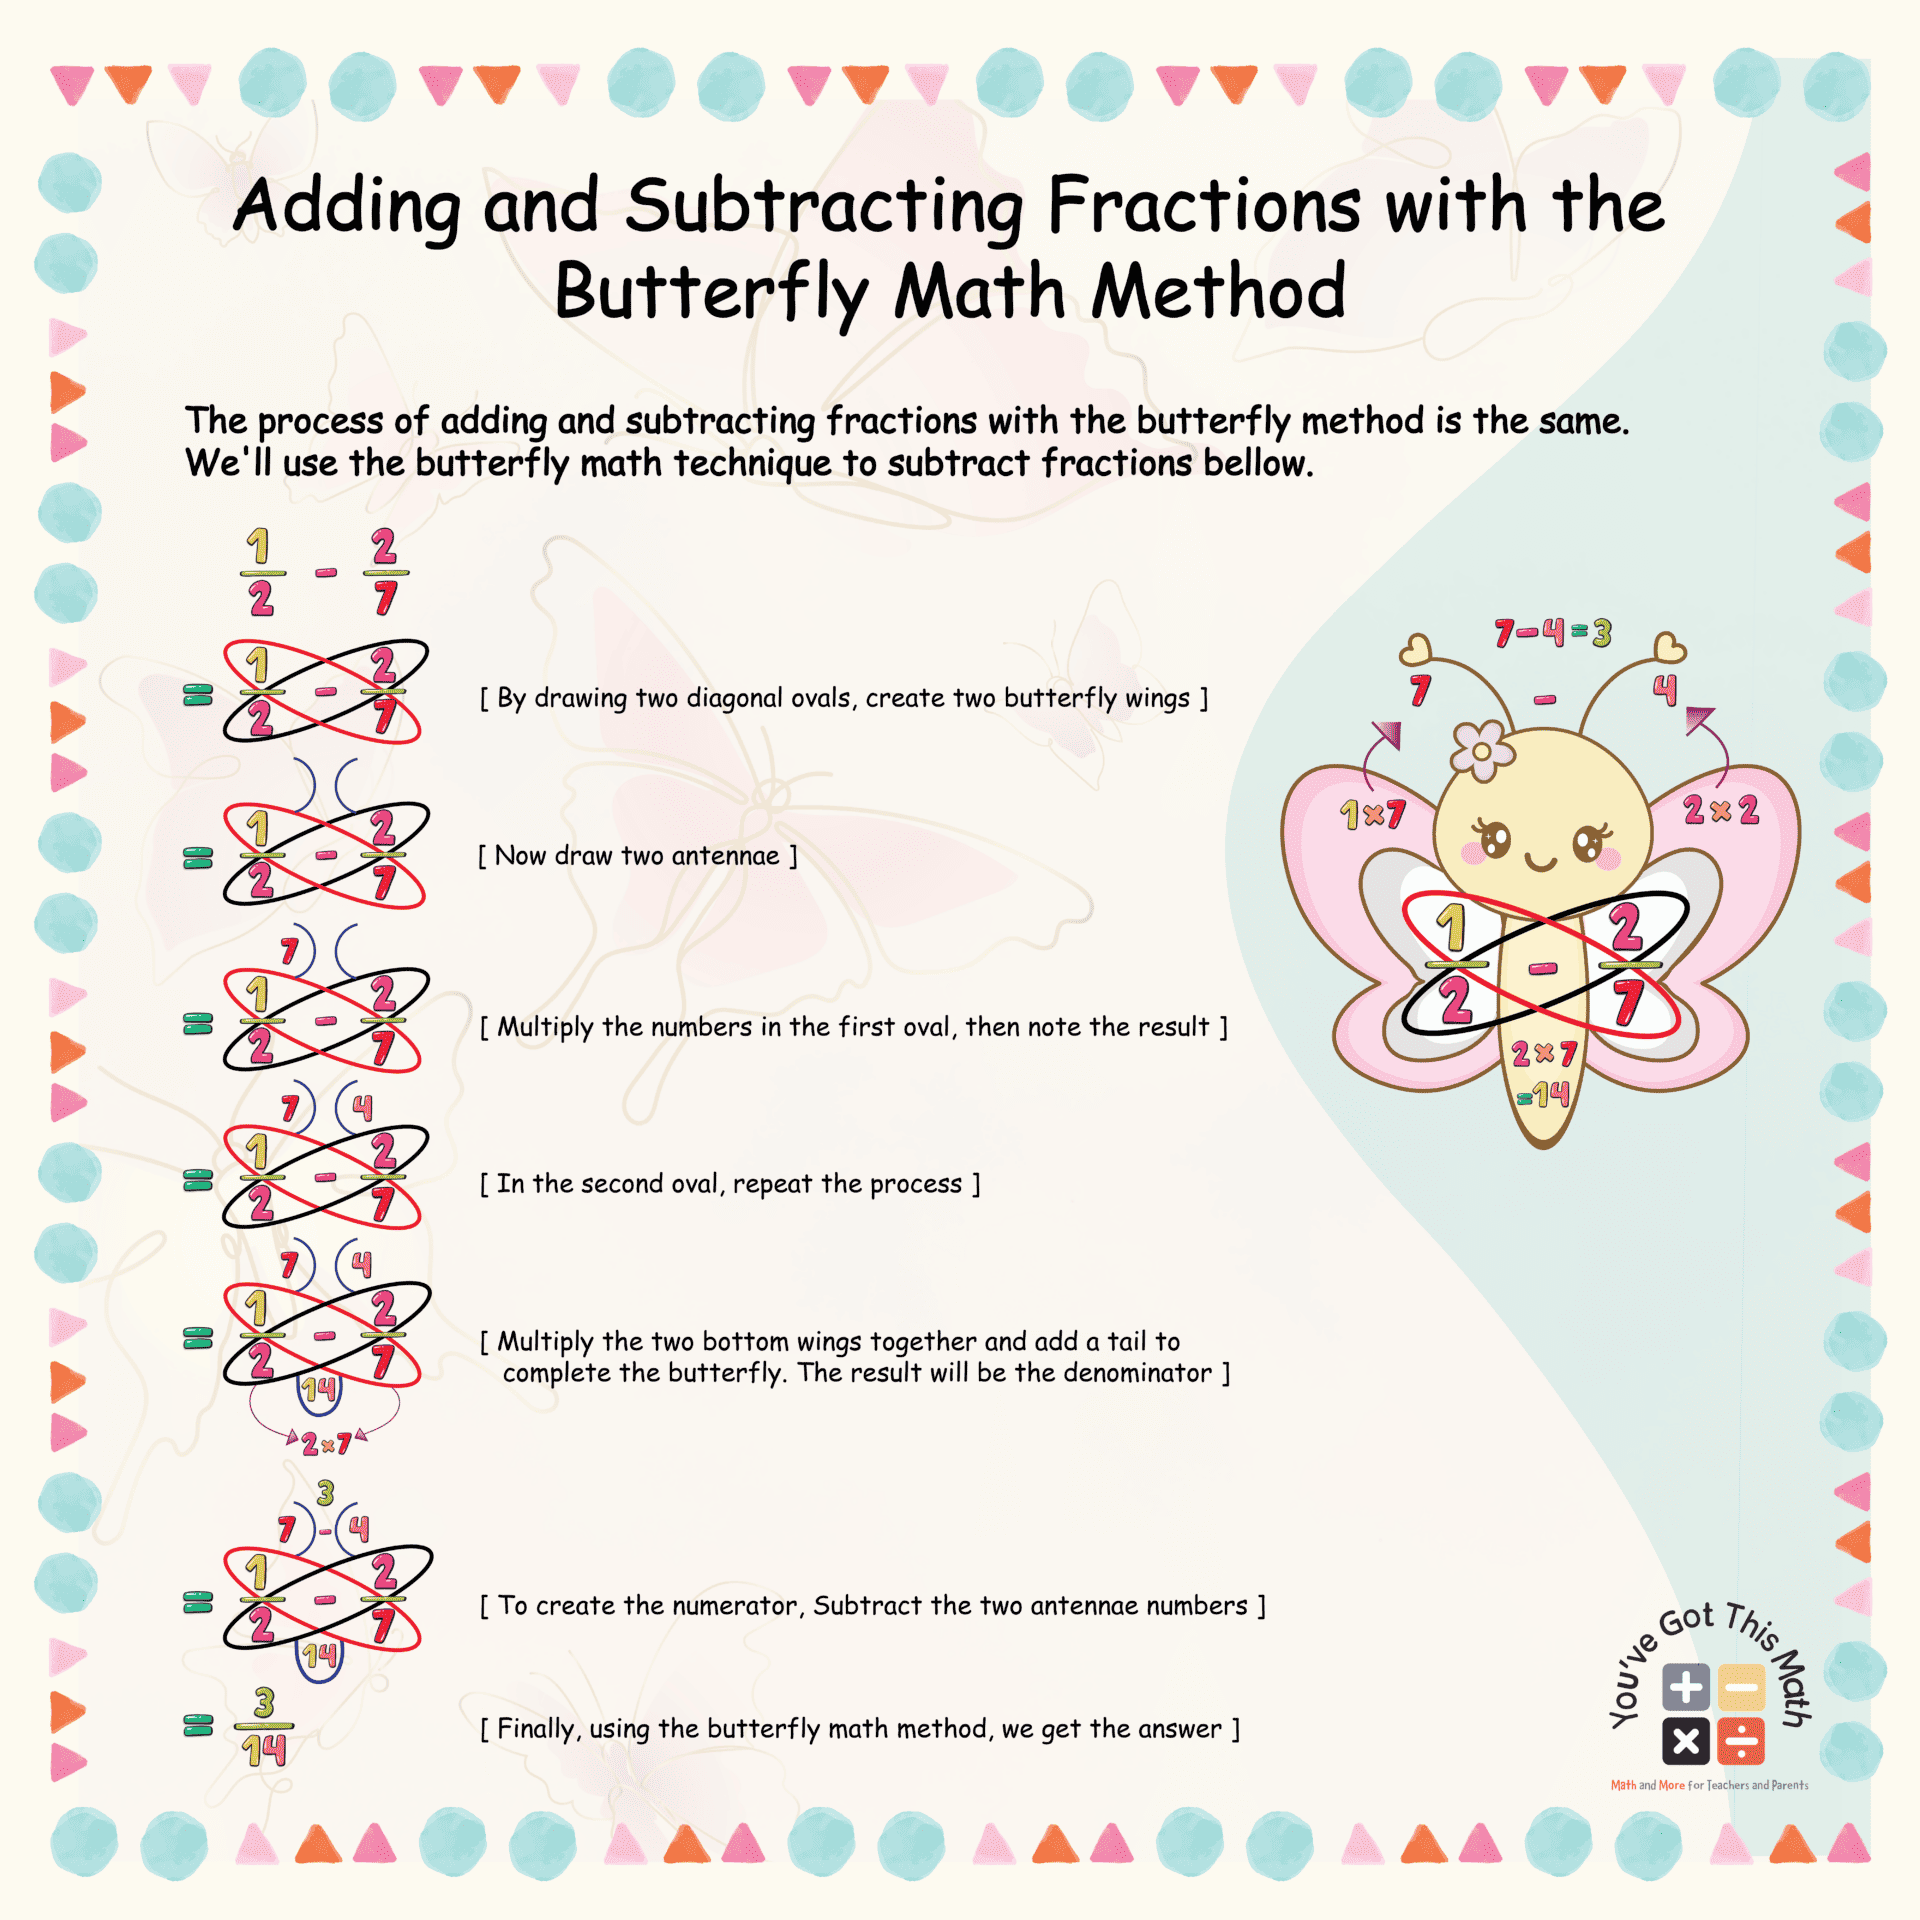 Adding and Subtracting Fractions with the Butterfly Math Method